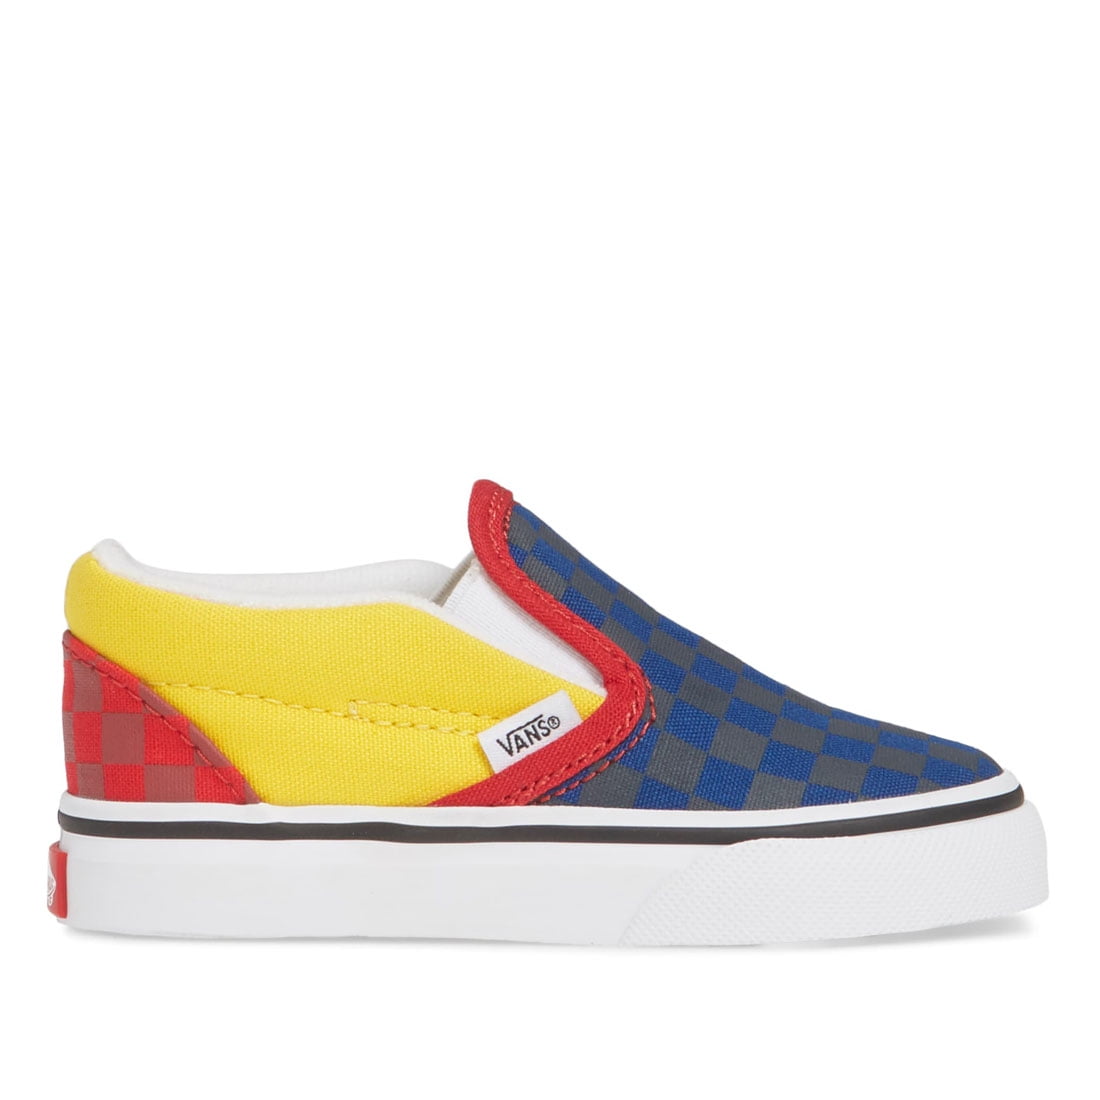 Vans Kids Classic Slip-On (Infant/Toddler) Boys Shoes (OTW Rally) Navy/Yellow/Red : 5.5 Toddler M